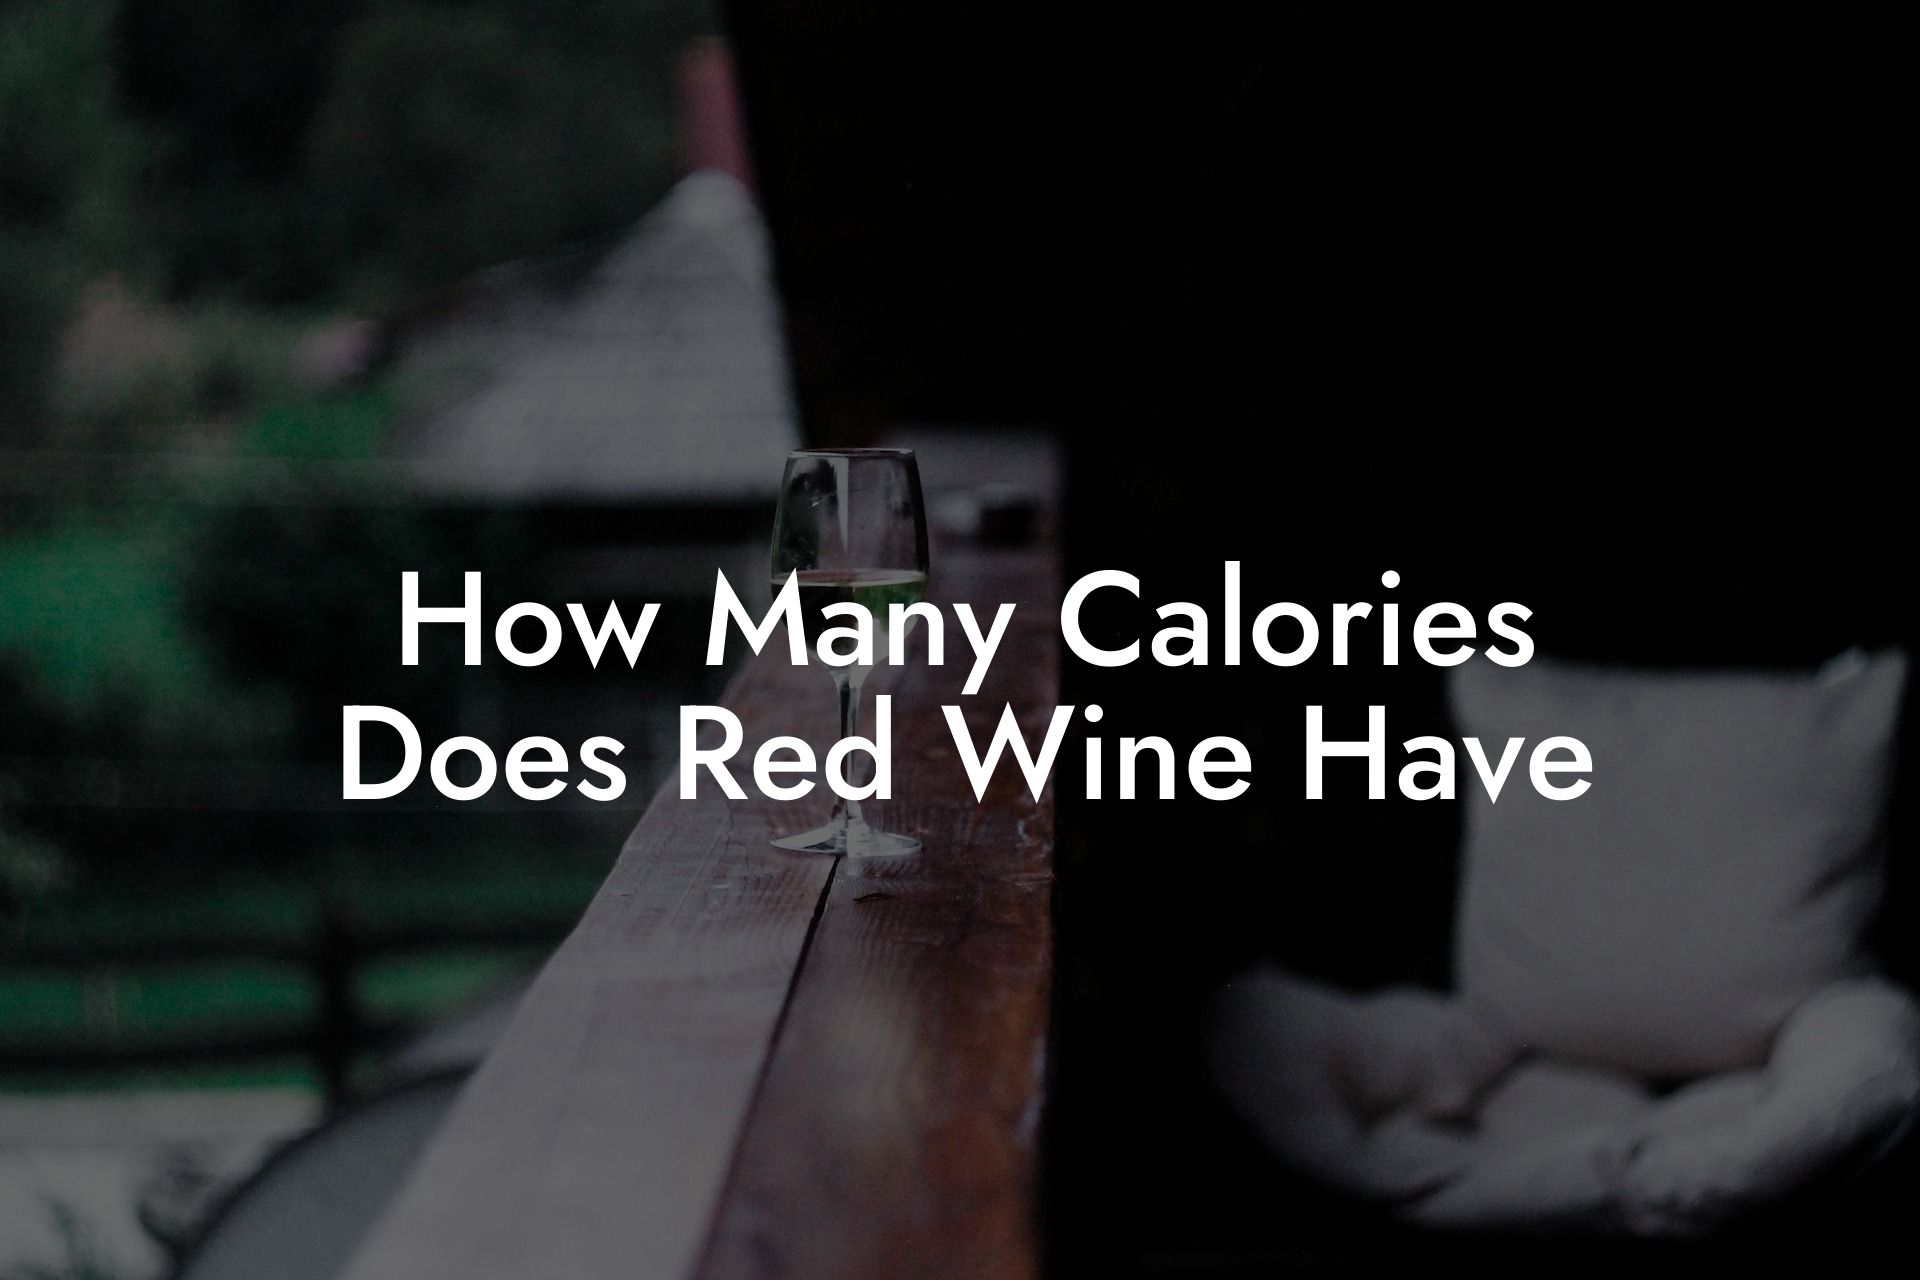 How Many Calories Does Red Wine Have